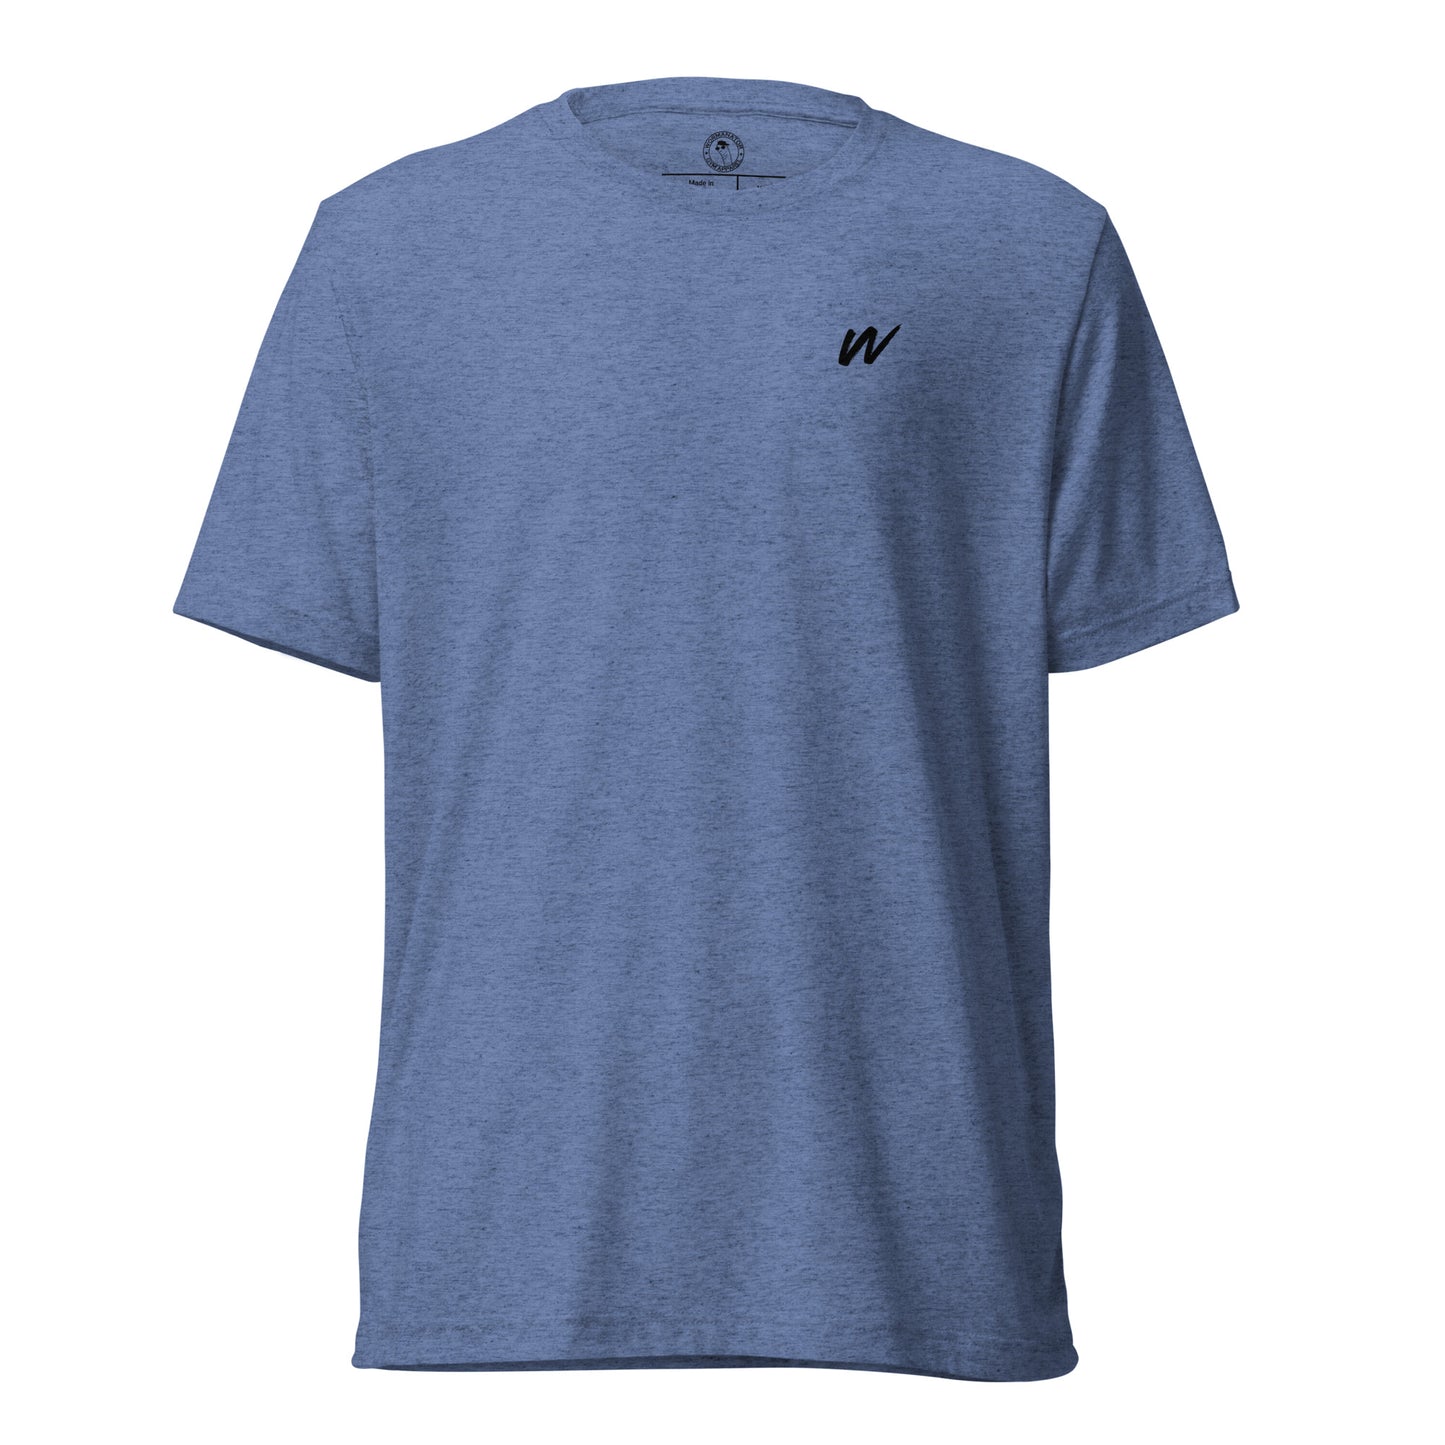 Win the Day T-Shirt in Blue Triblend